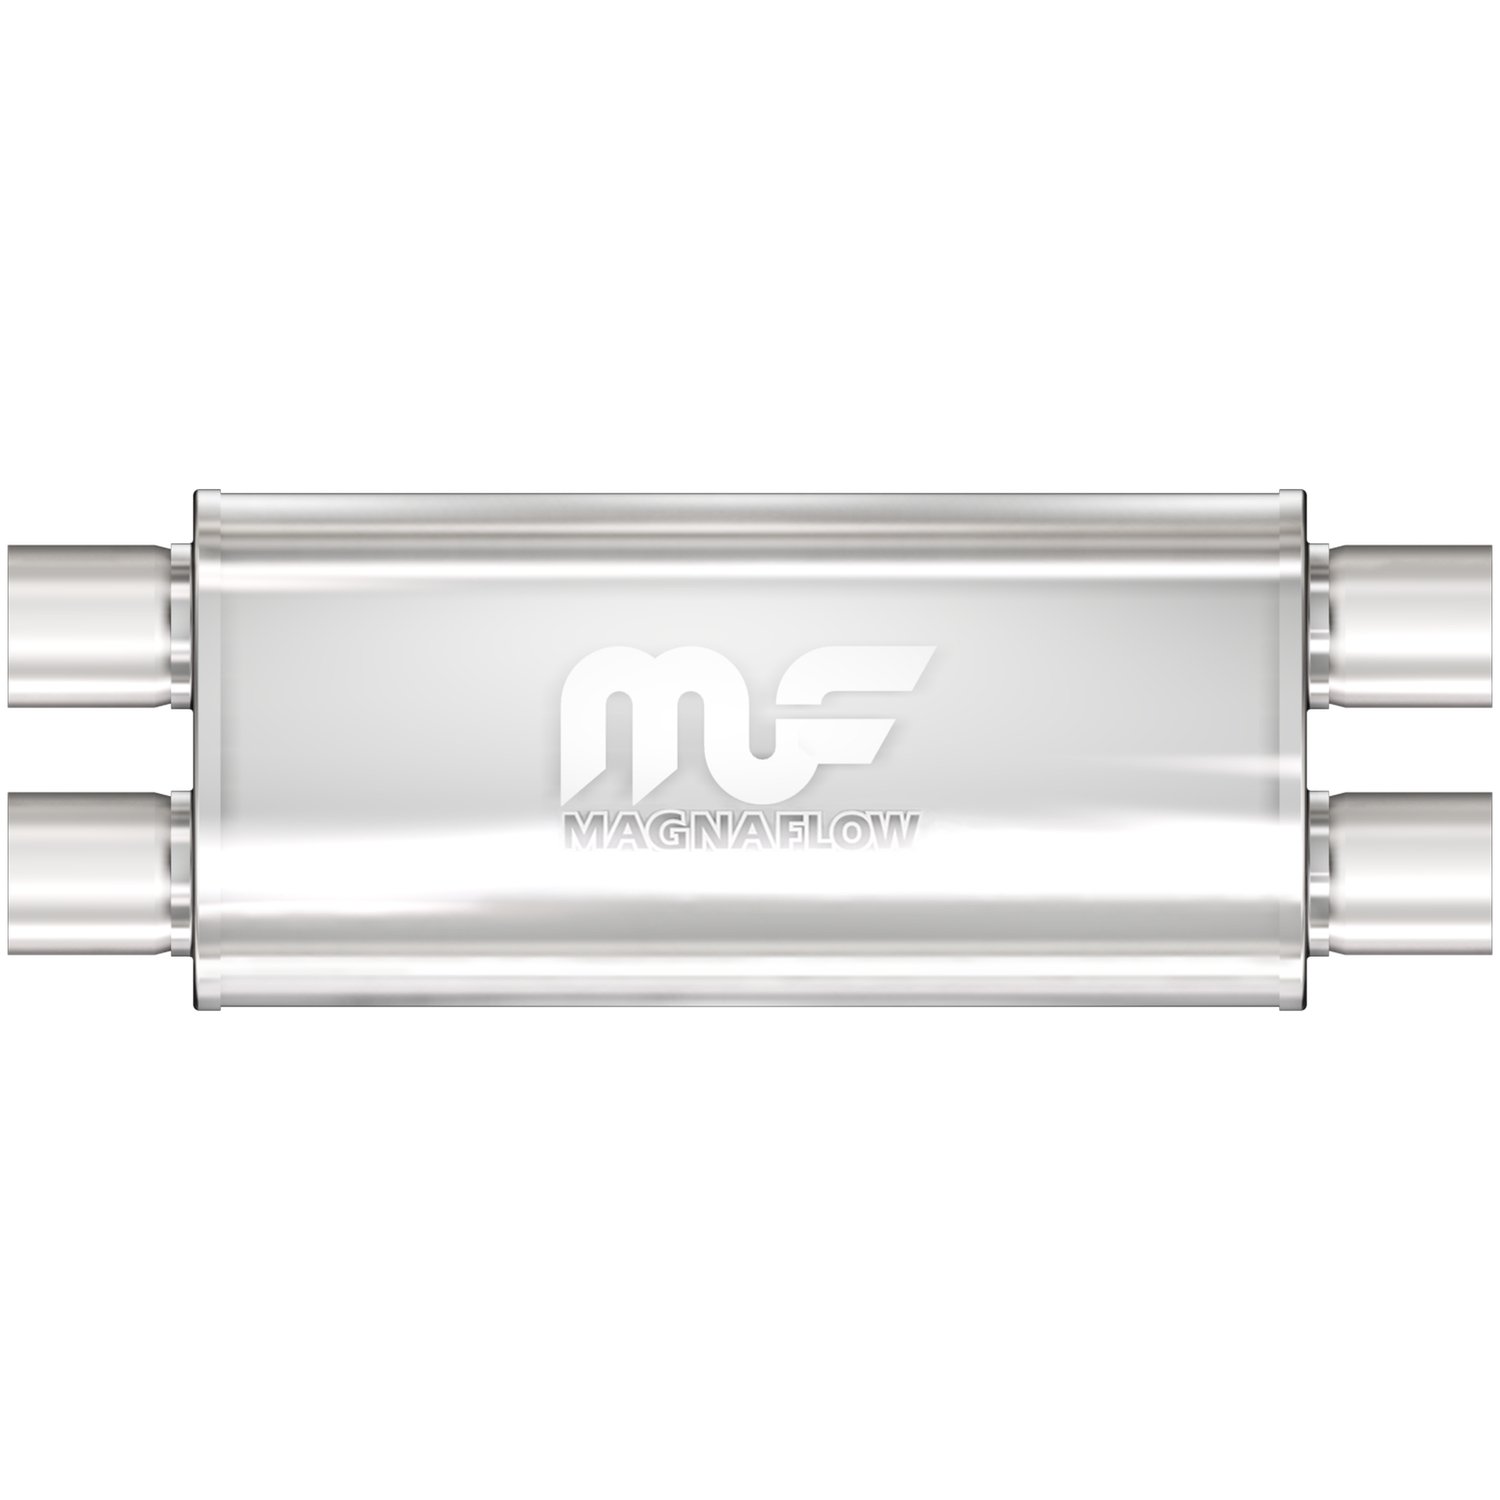 5" x 8" Oval Muffler Dual In/Dual Out: 2.5" Body Length: 18" Overall Length: 24" Core Size: 2.5" Satin Finish